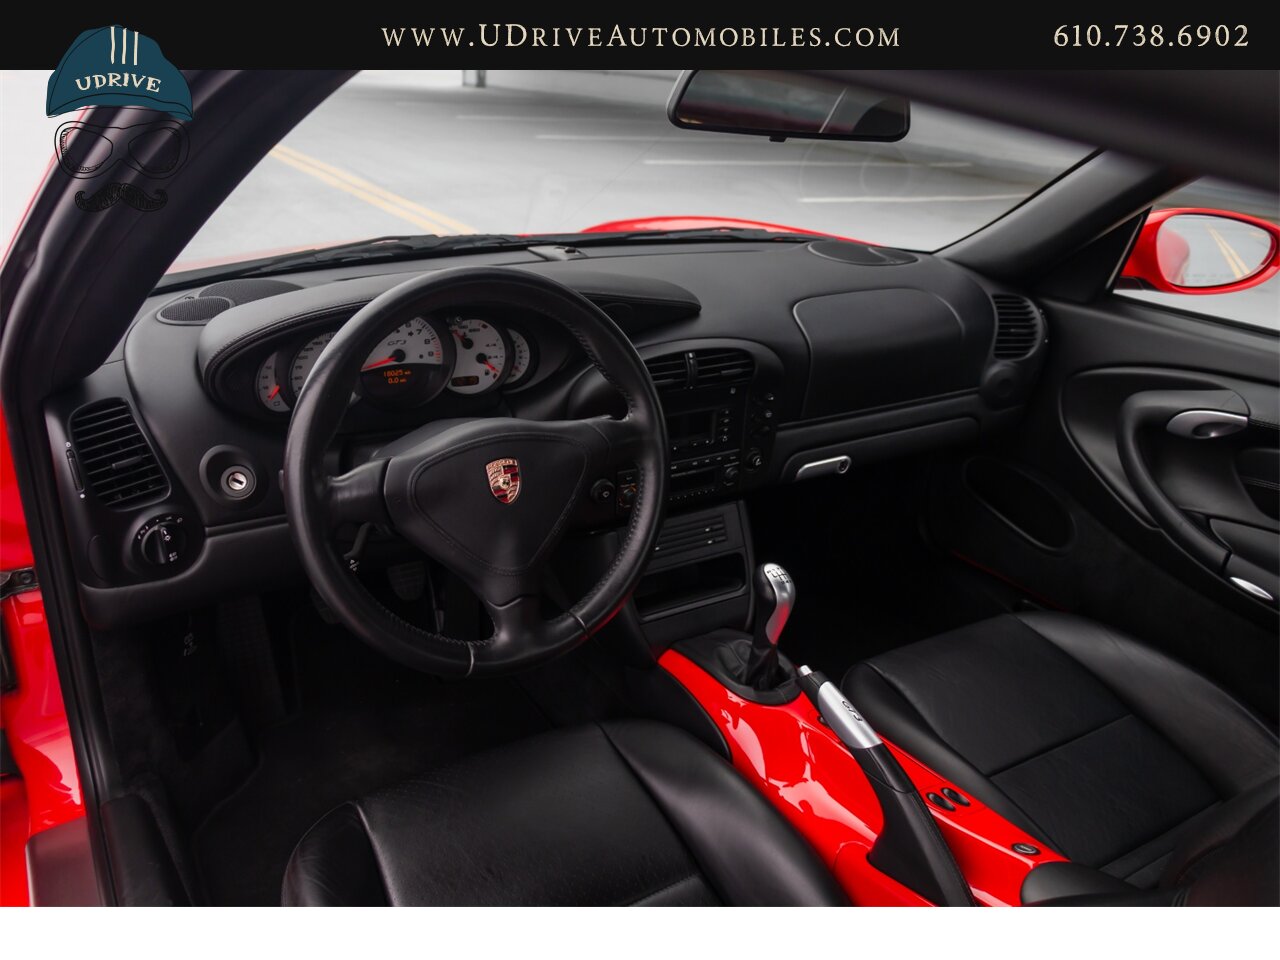 2004 Porsche 911 996 GT3 Guards Red Sport Seats Painted Hardbacks  Painted Center Console 18k Miles - Photo 32 - West Chester, PA 19382